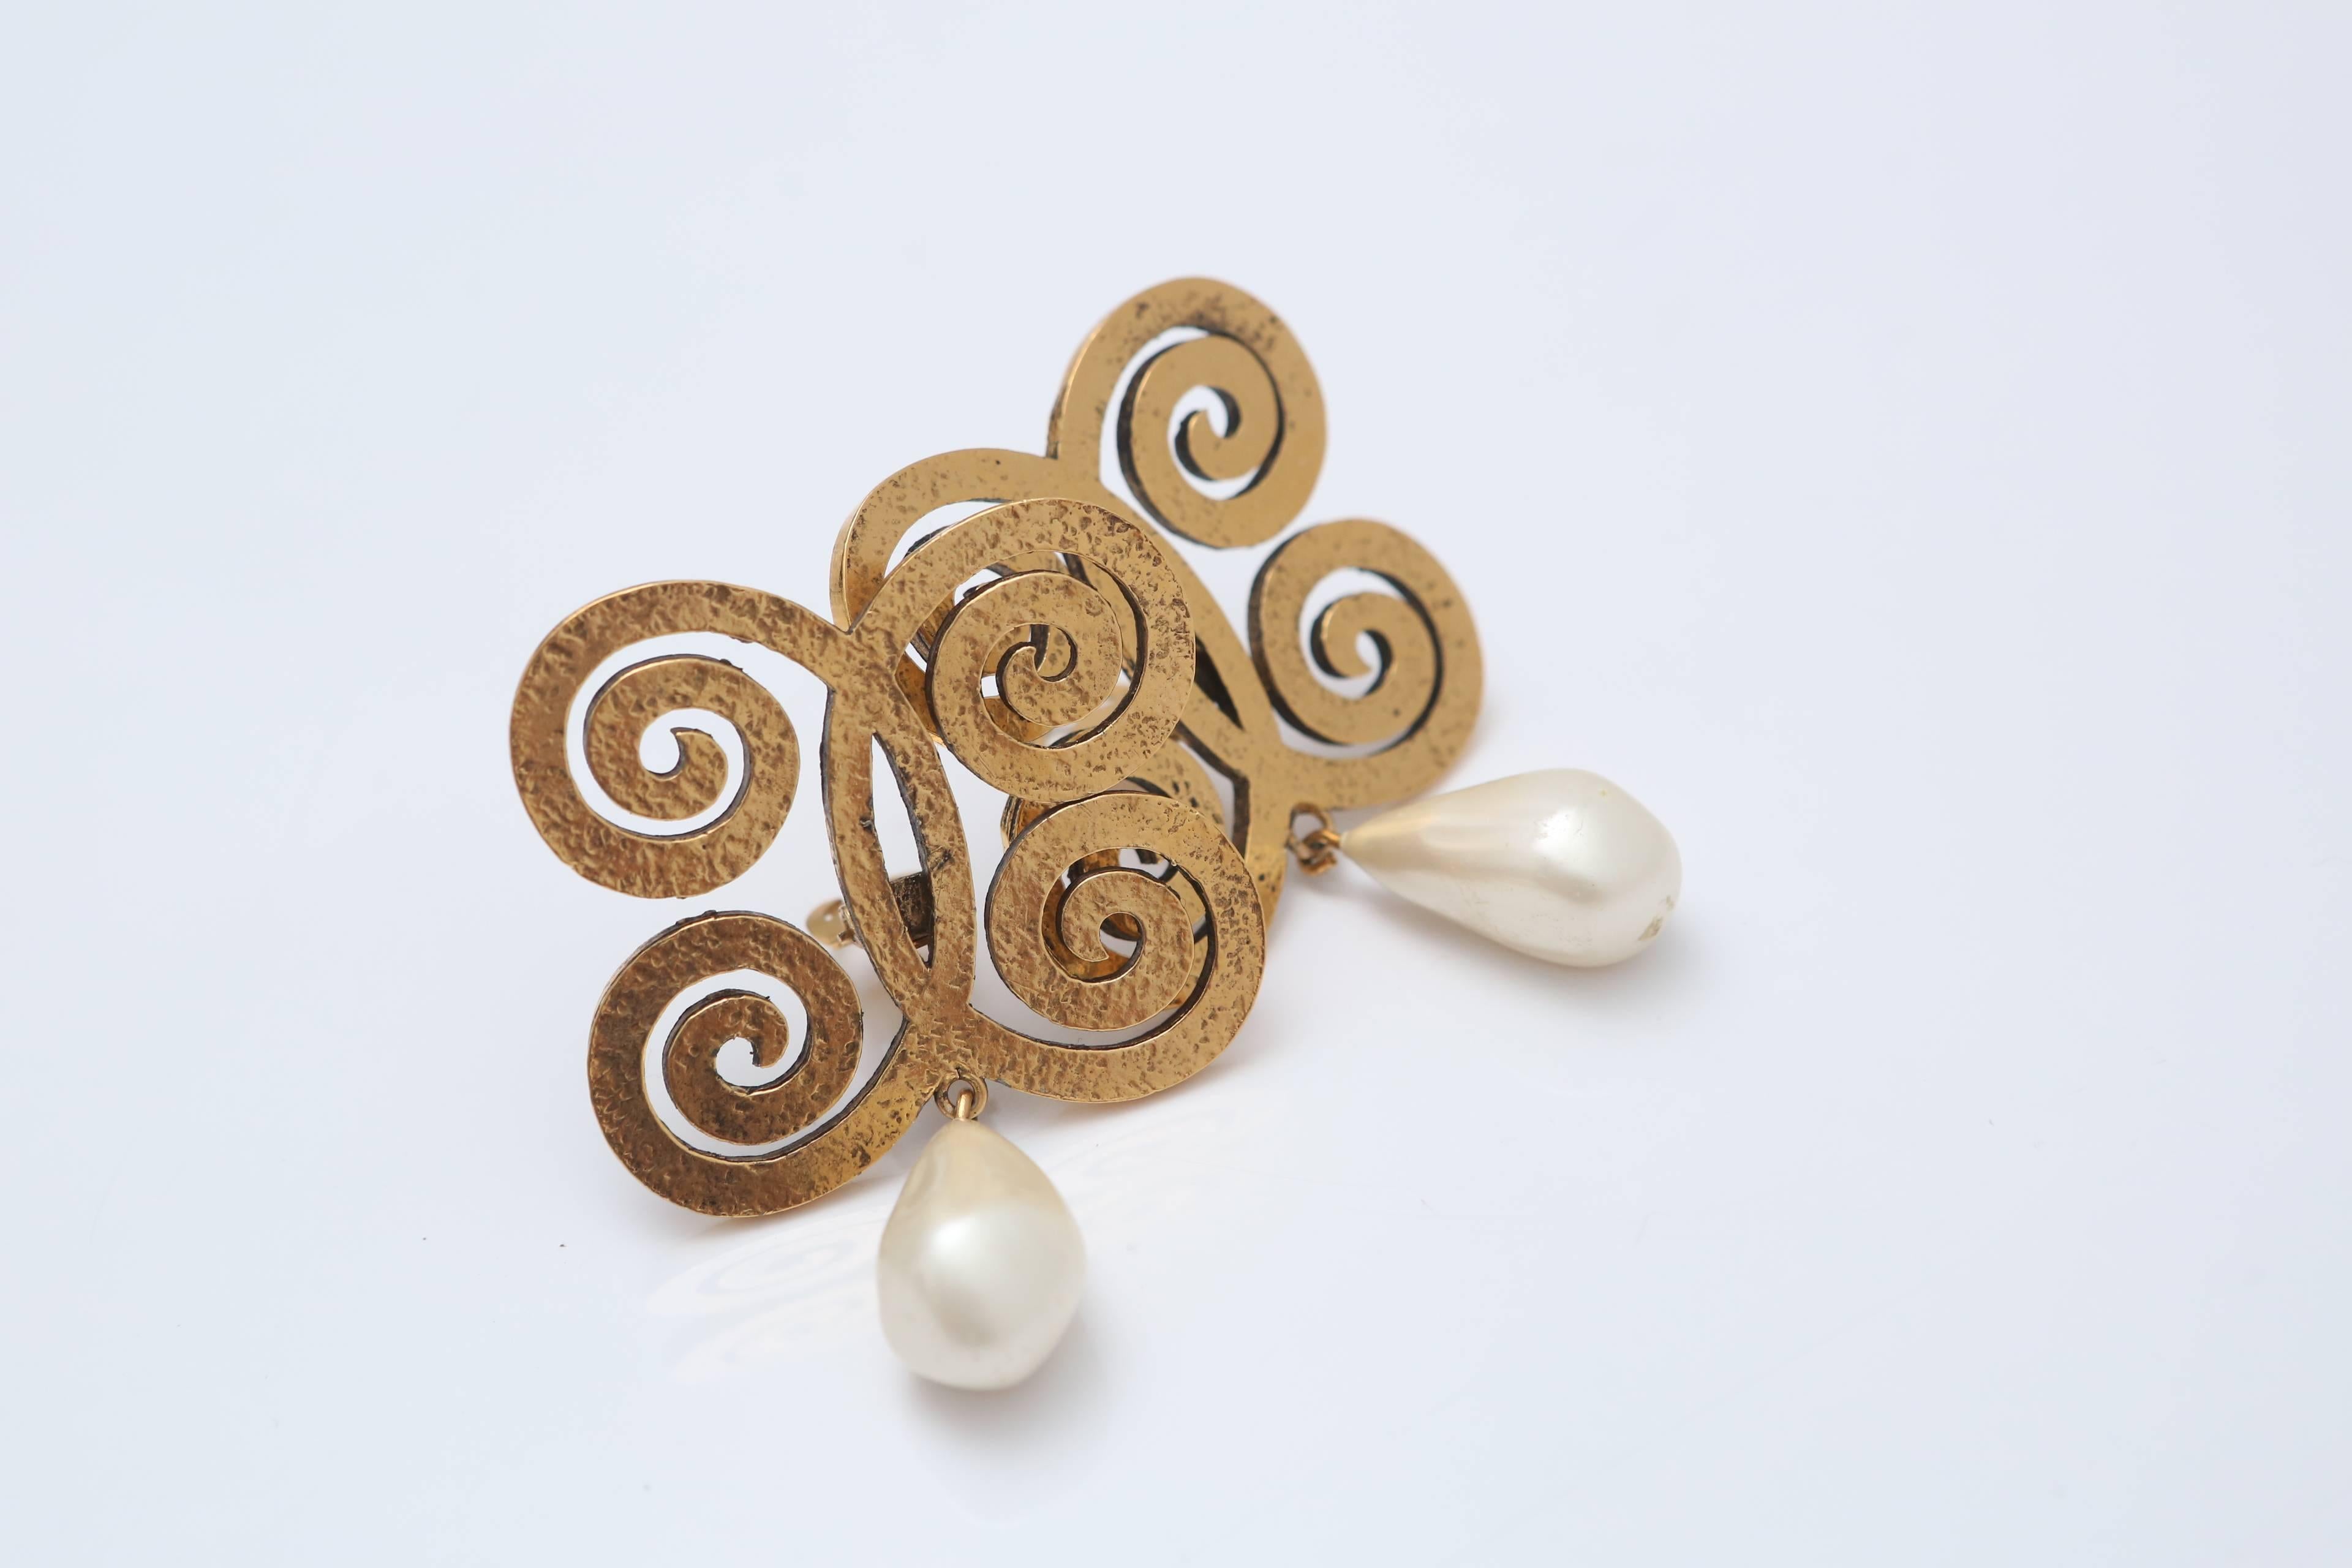 Chanel gold/ivory clip on earrings with dangling faux pearls and curved double 'C' detail. 

Chanel stamp included. 